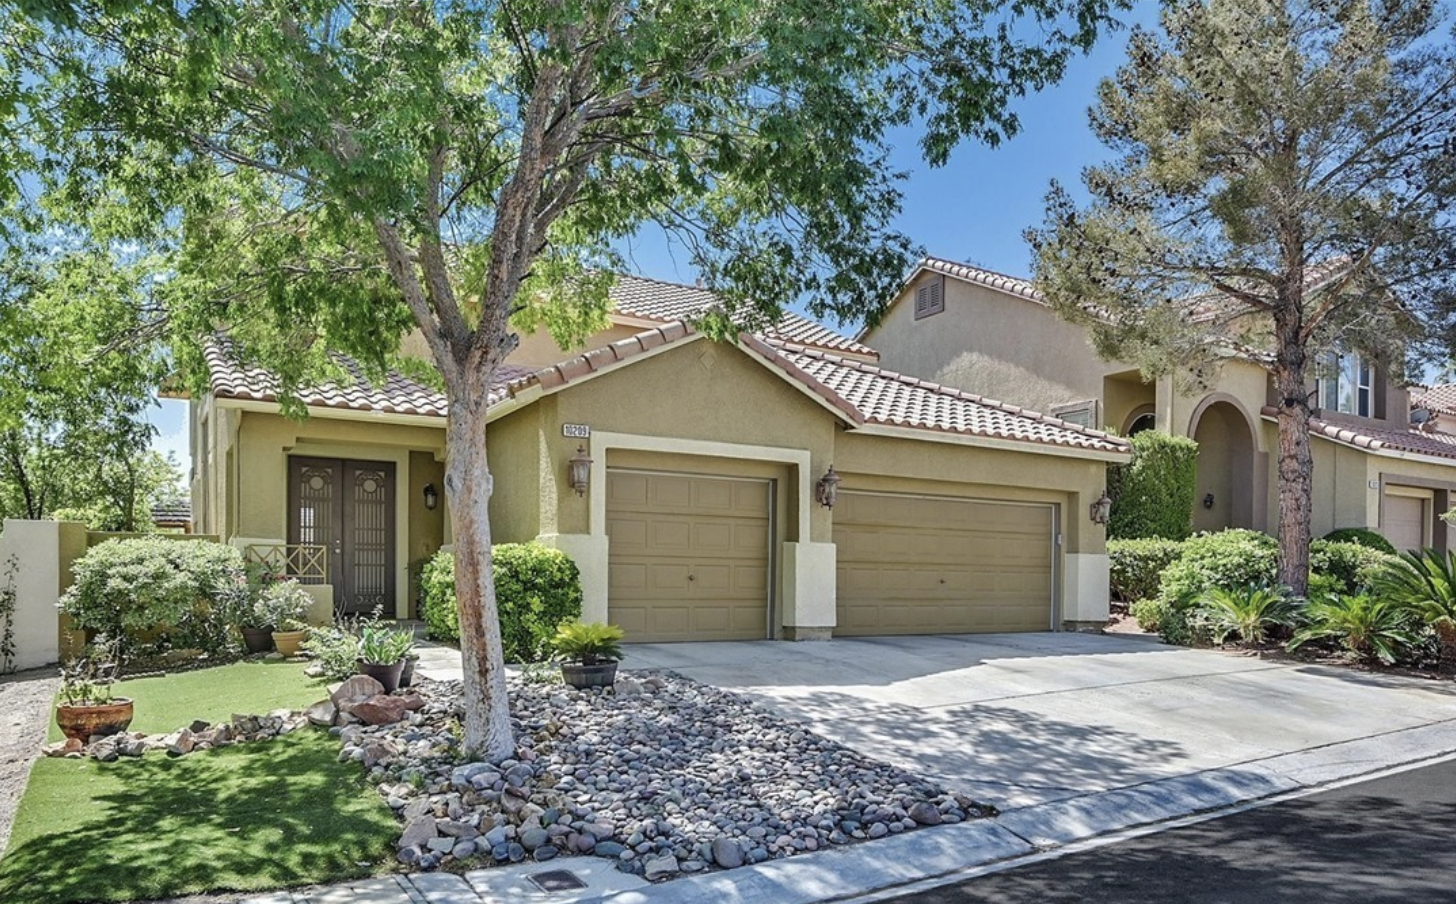 A beautifully landscaped beige home full-sized trees, turf, bushes, palms, and stone garden beds